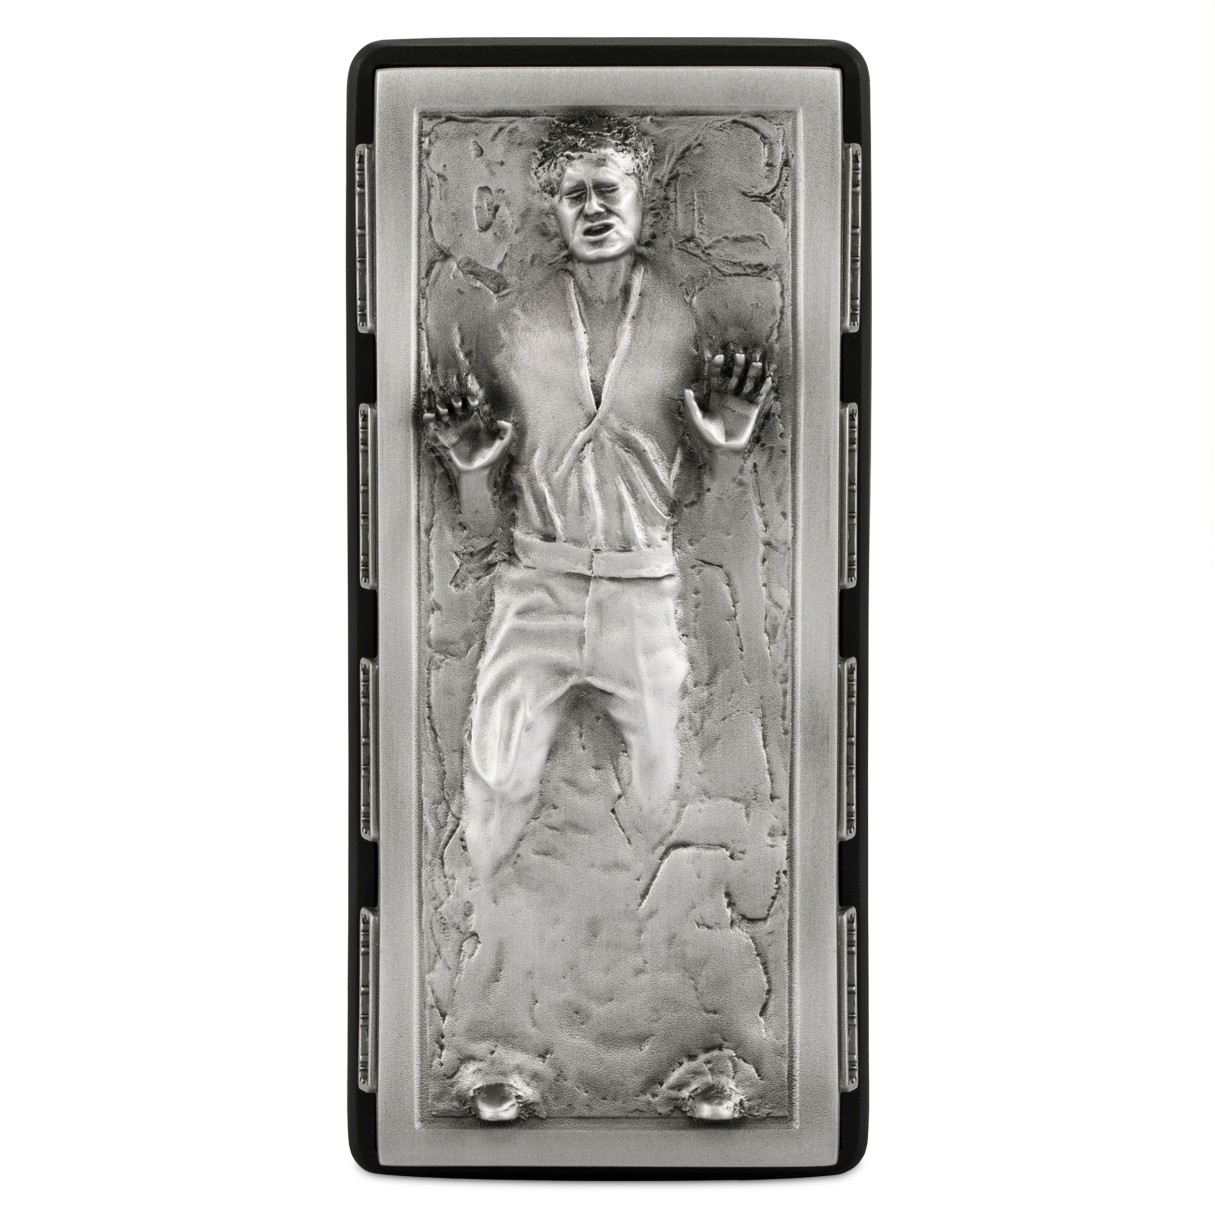 Han Solo in Carbonite Pewter Figurine Container by Royal Selangor – Star Wars